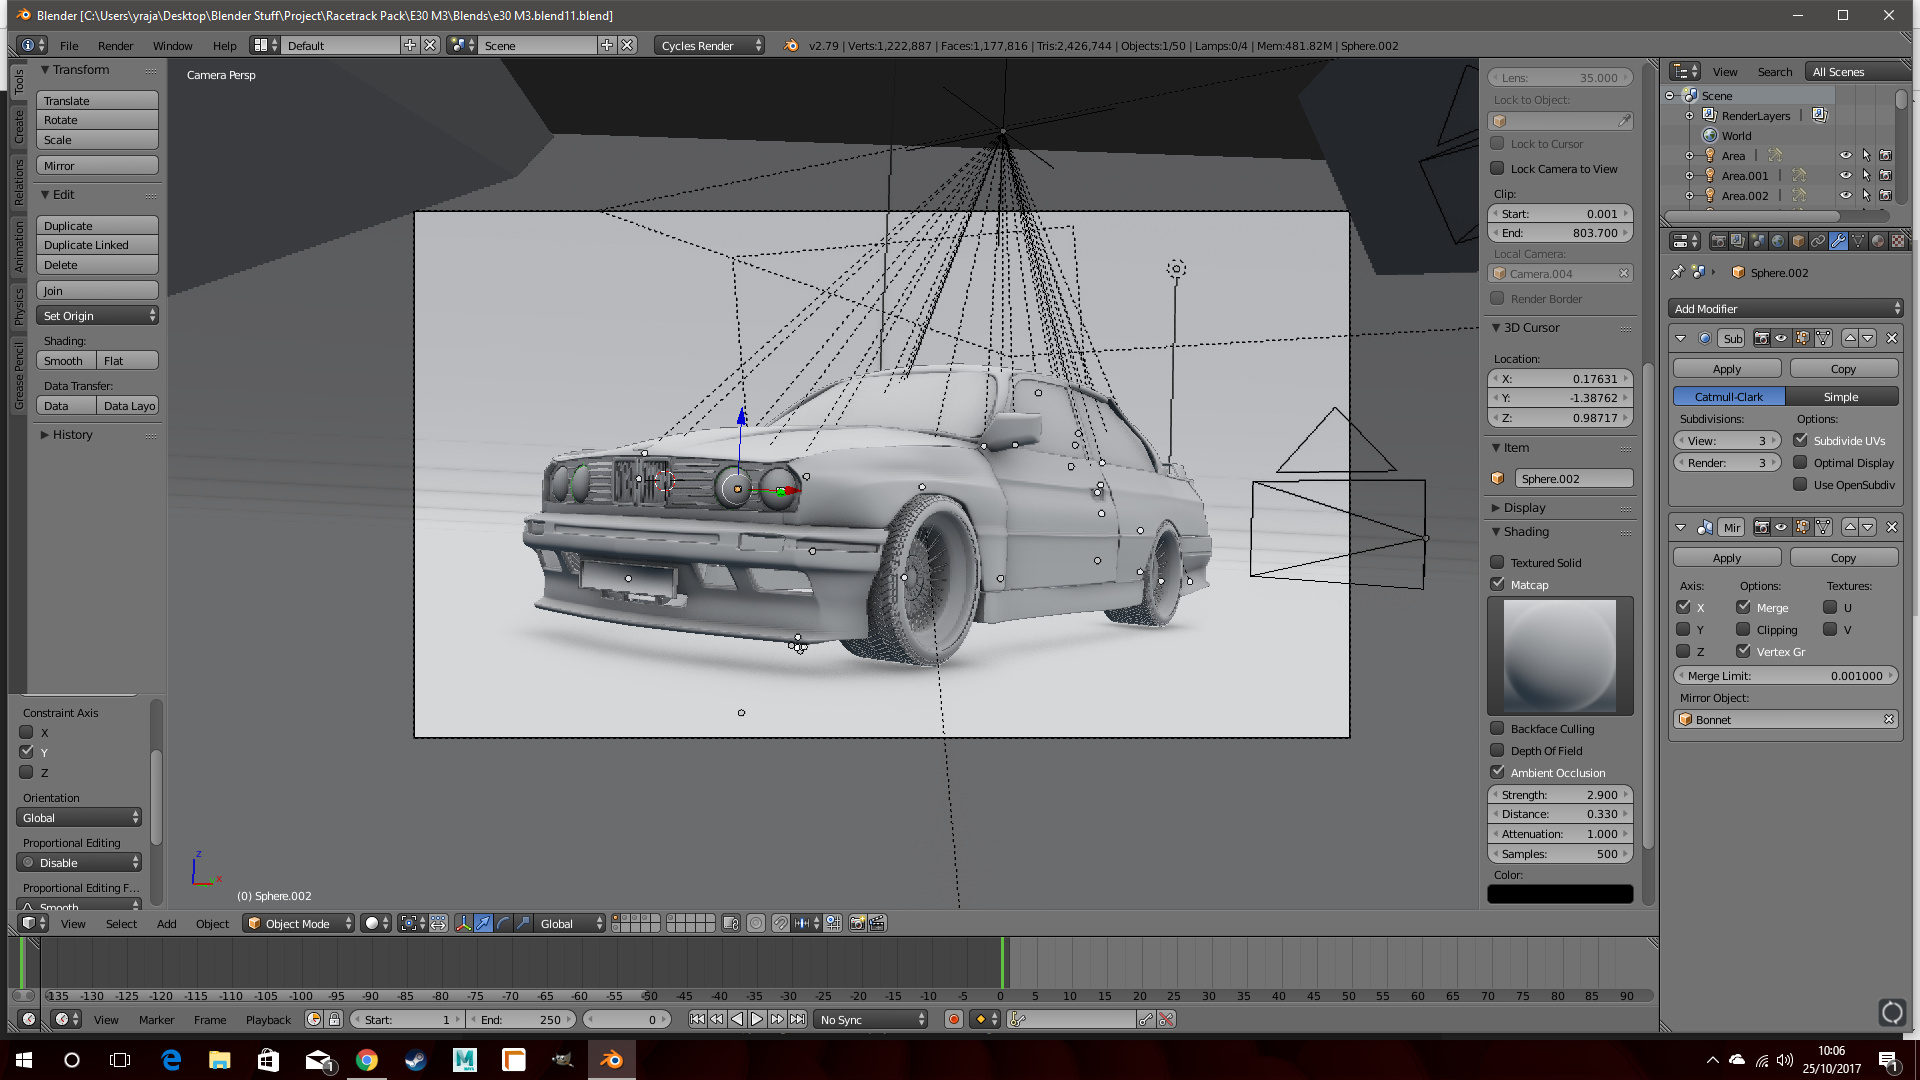 Any ideas on how to rig a car? - Animation and Rigging - Blender Artists  Community